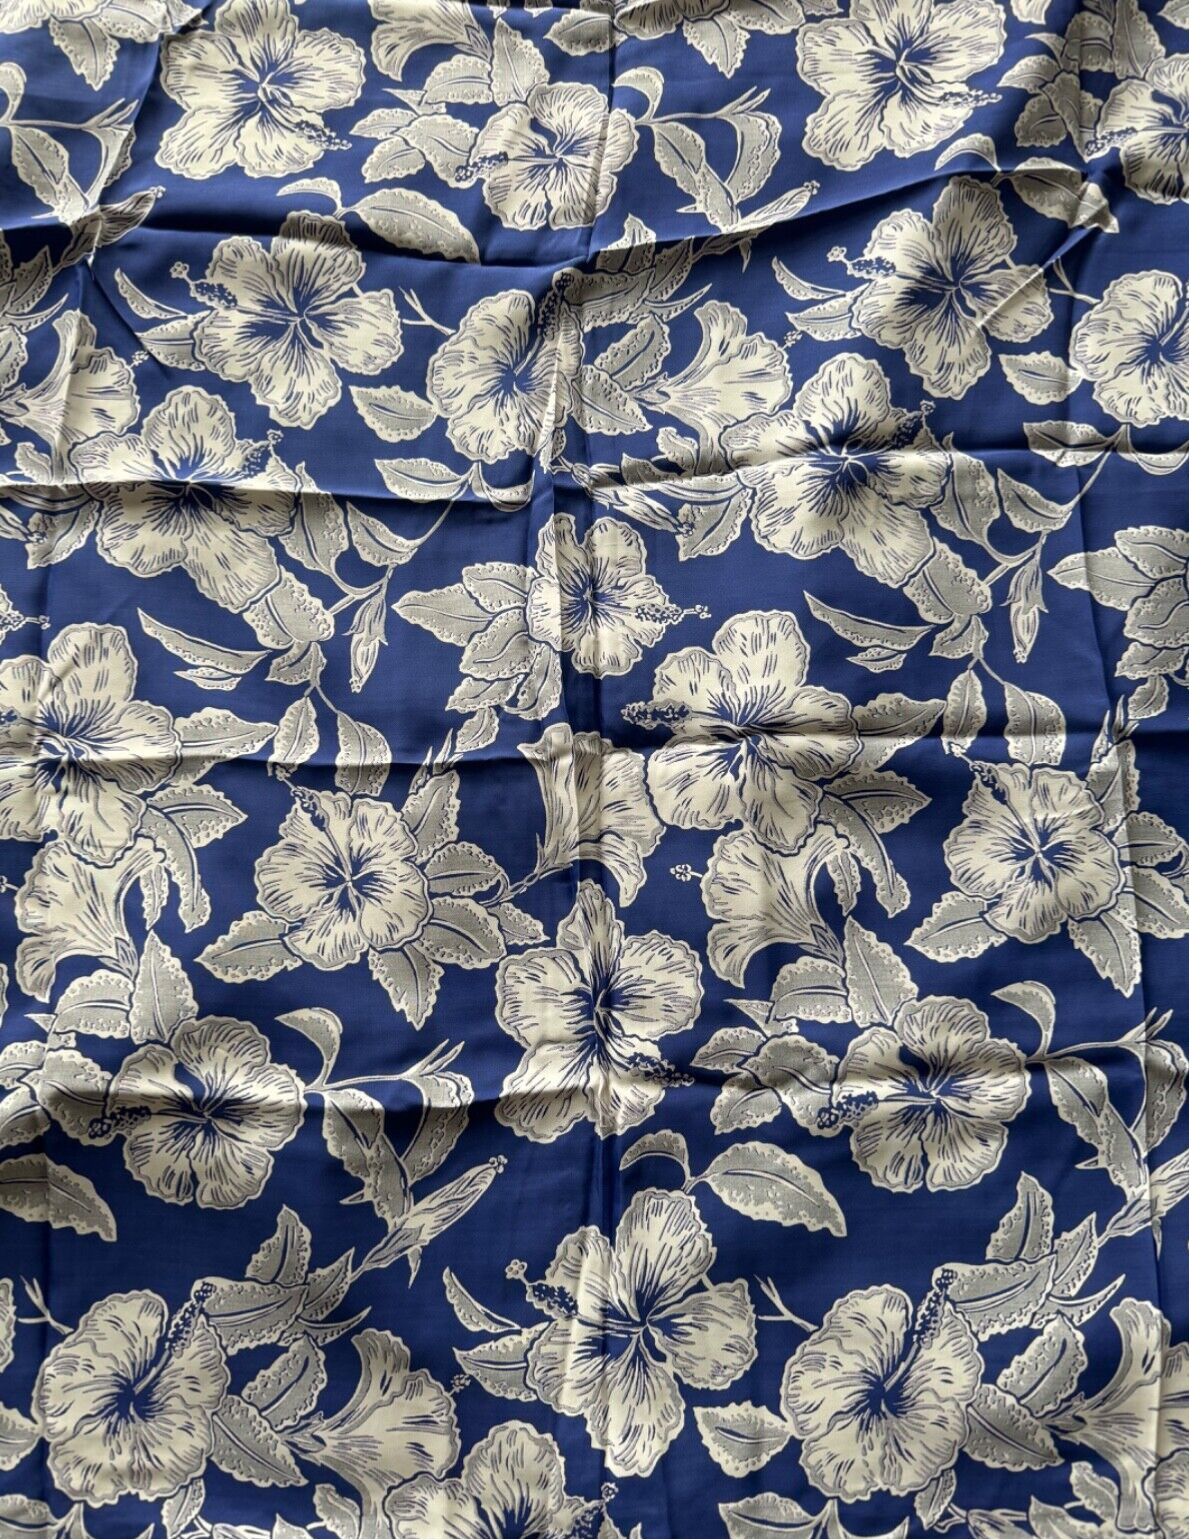 Vintage Fabric Blue & White Hibiscus 36 inches x 4.5 yards